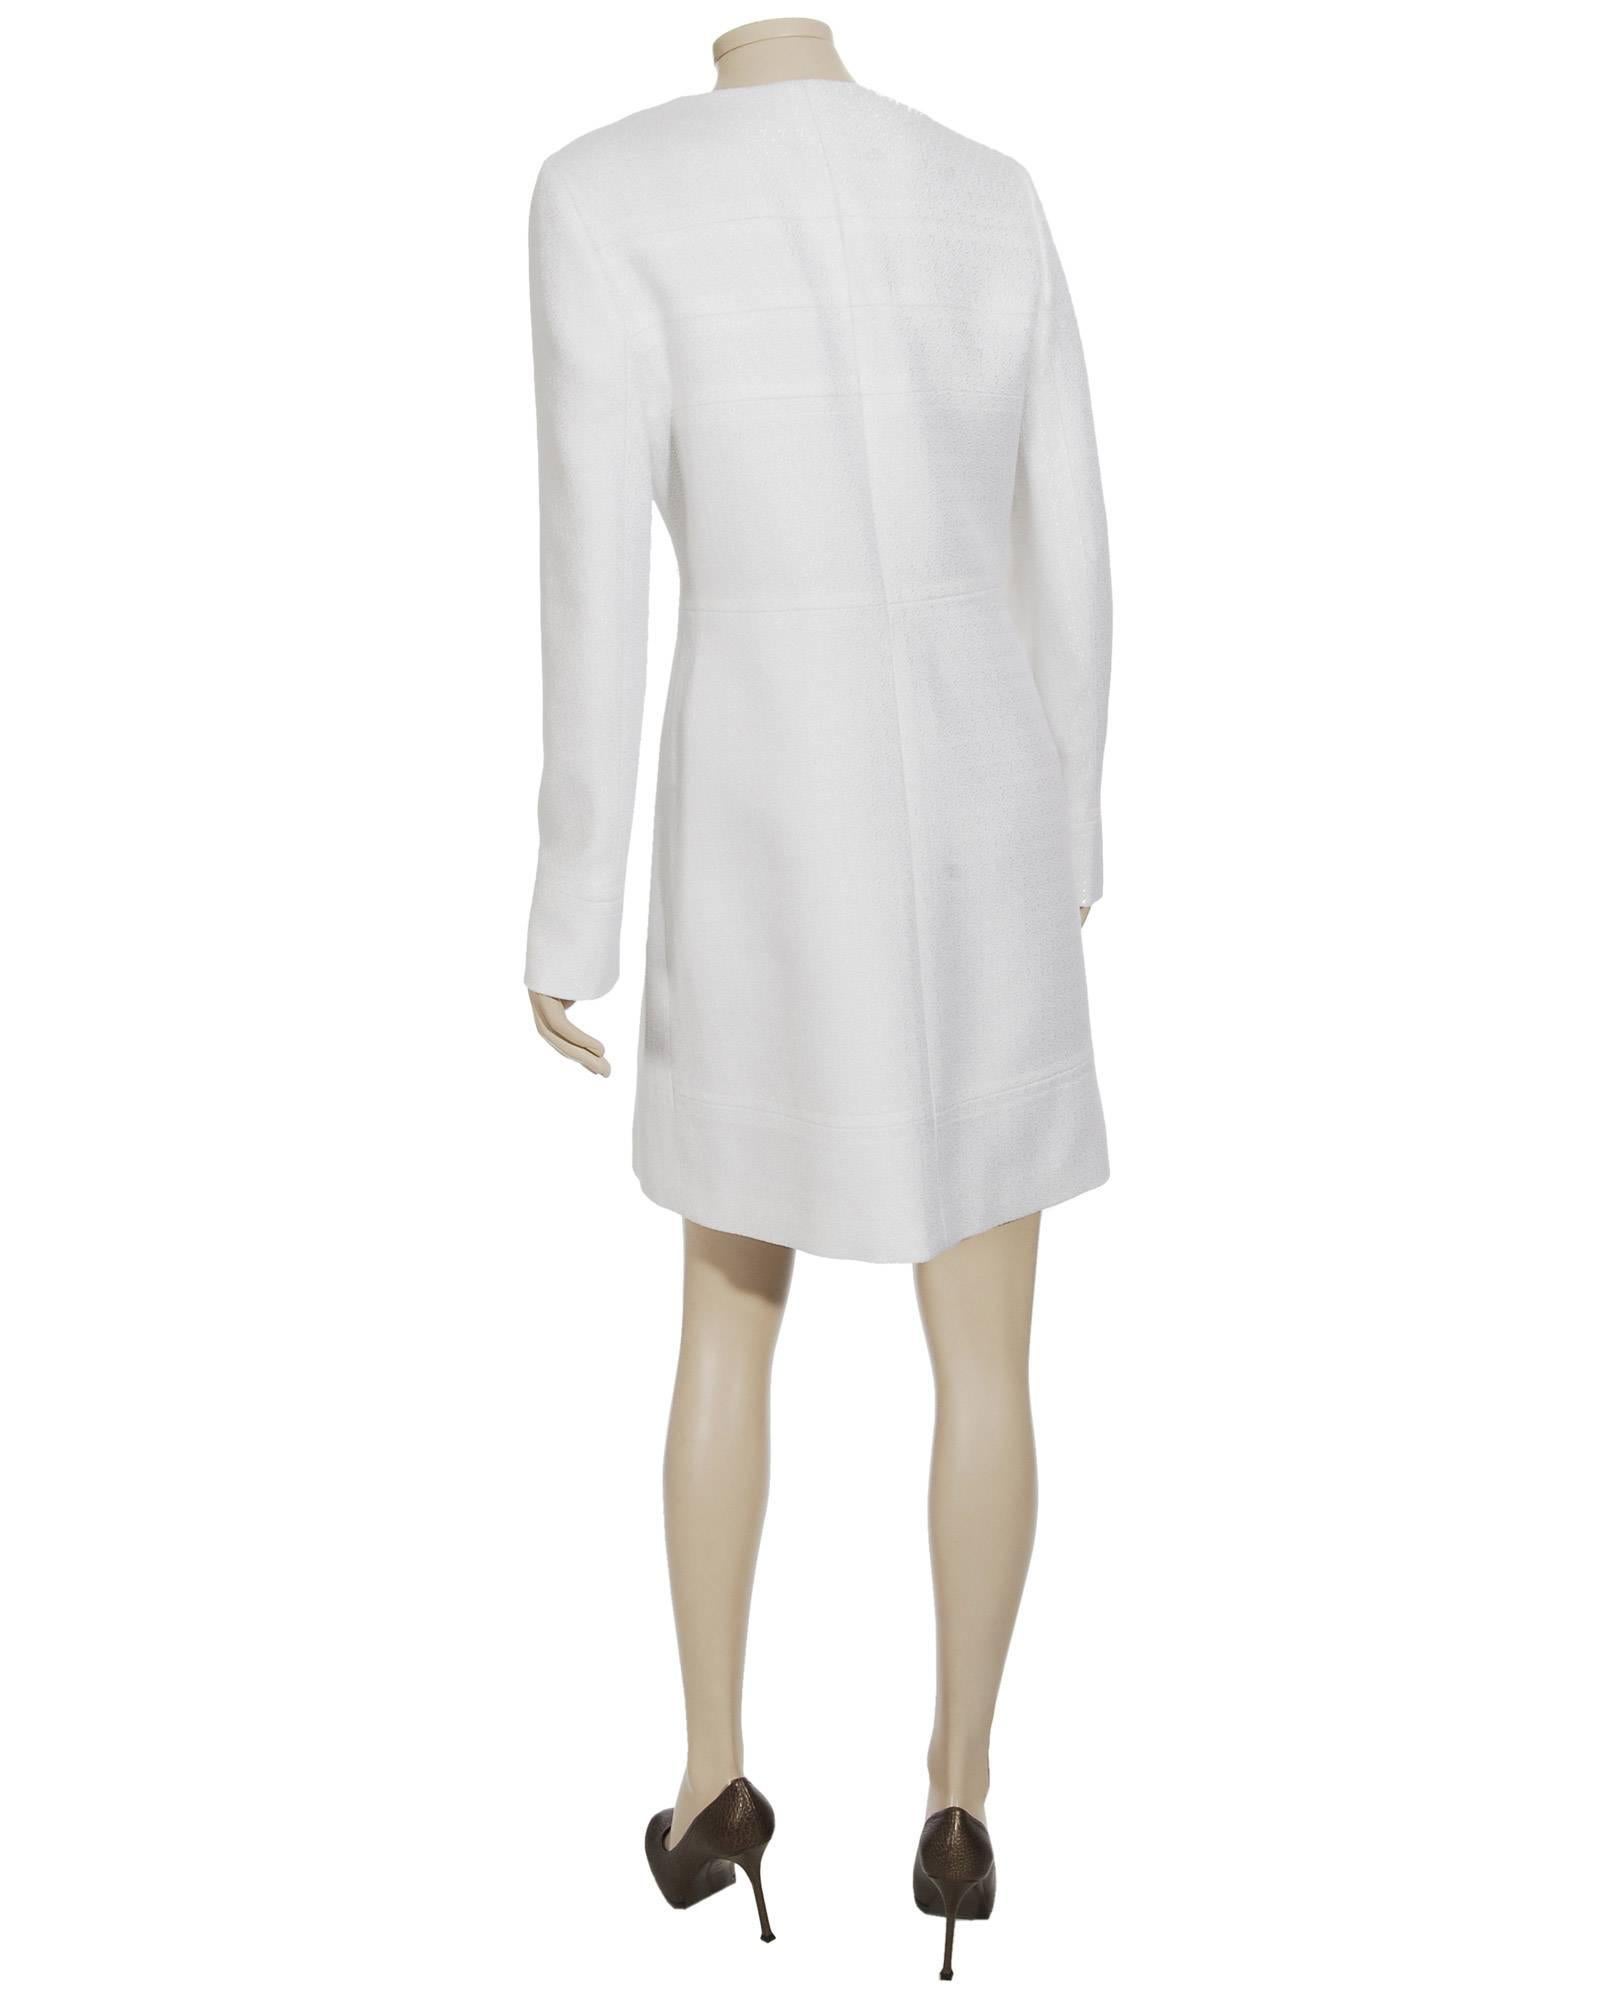 Gray Stunning Versace Ivory Coat with XL Button Details